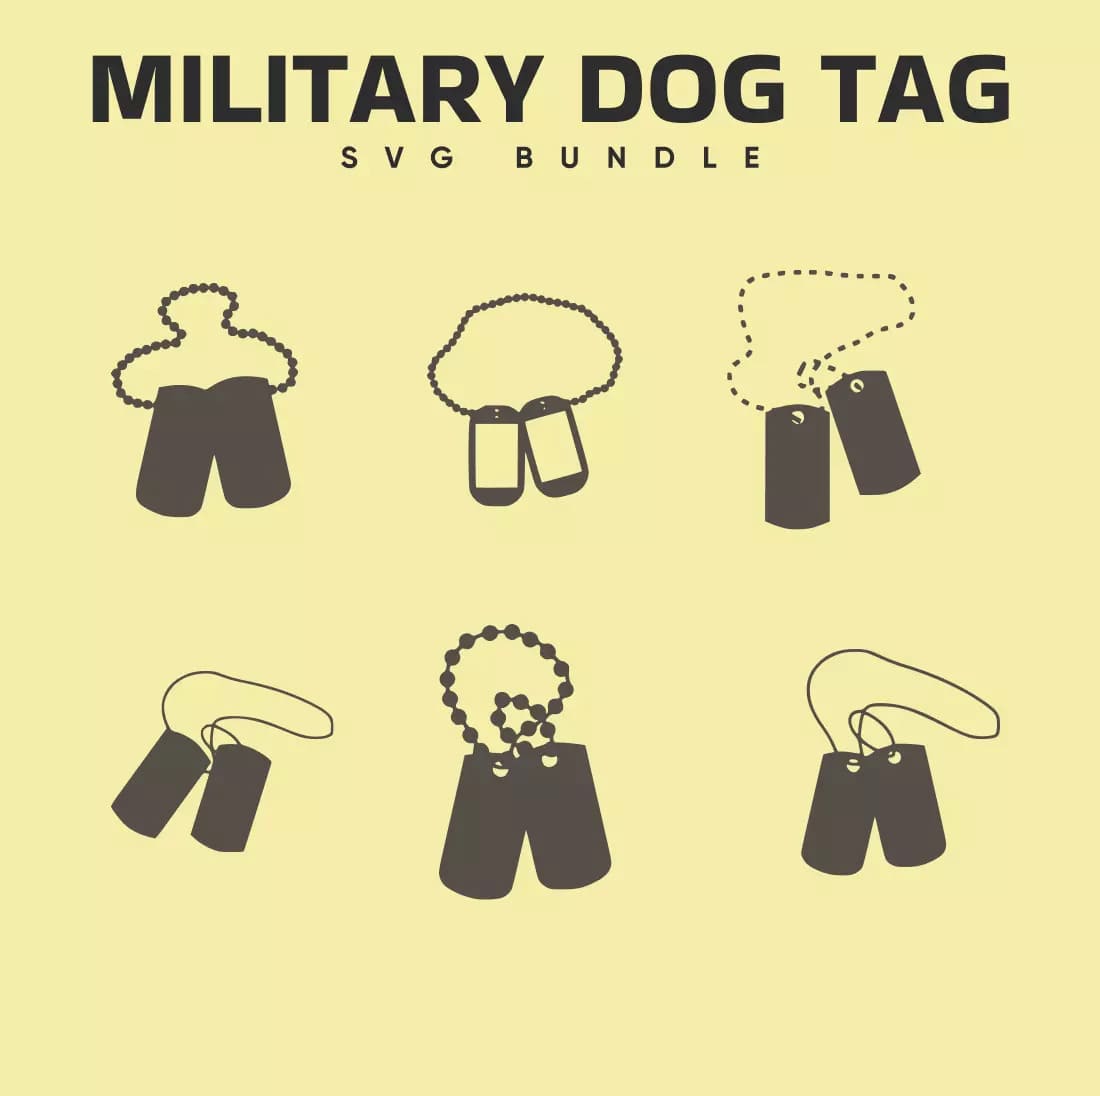 Military Dog Tag SVG Bundle Preview.